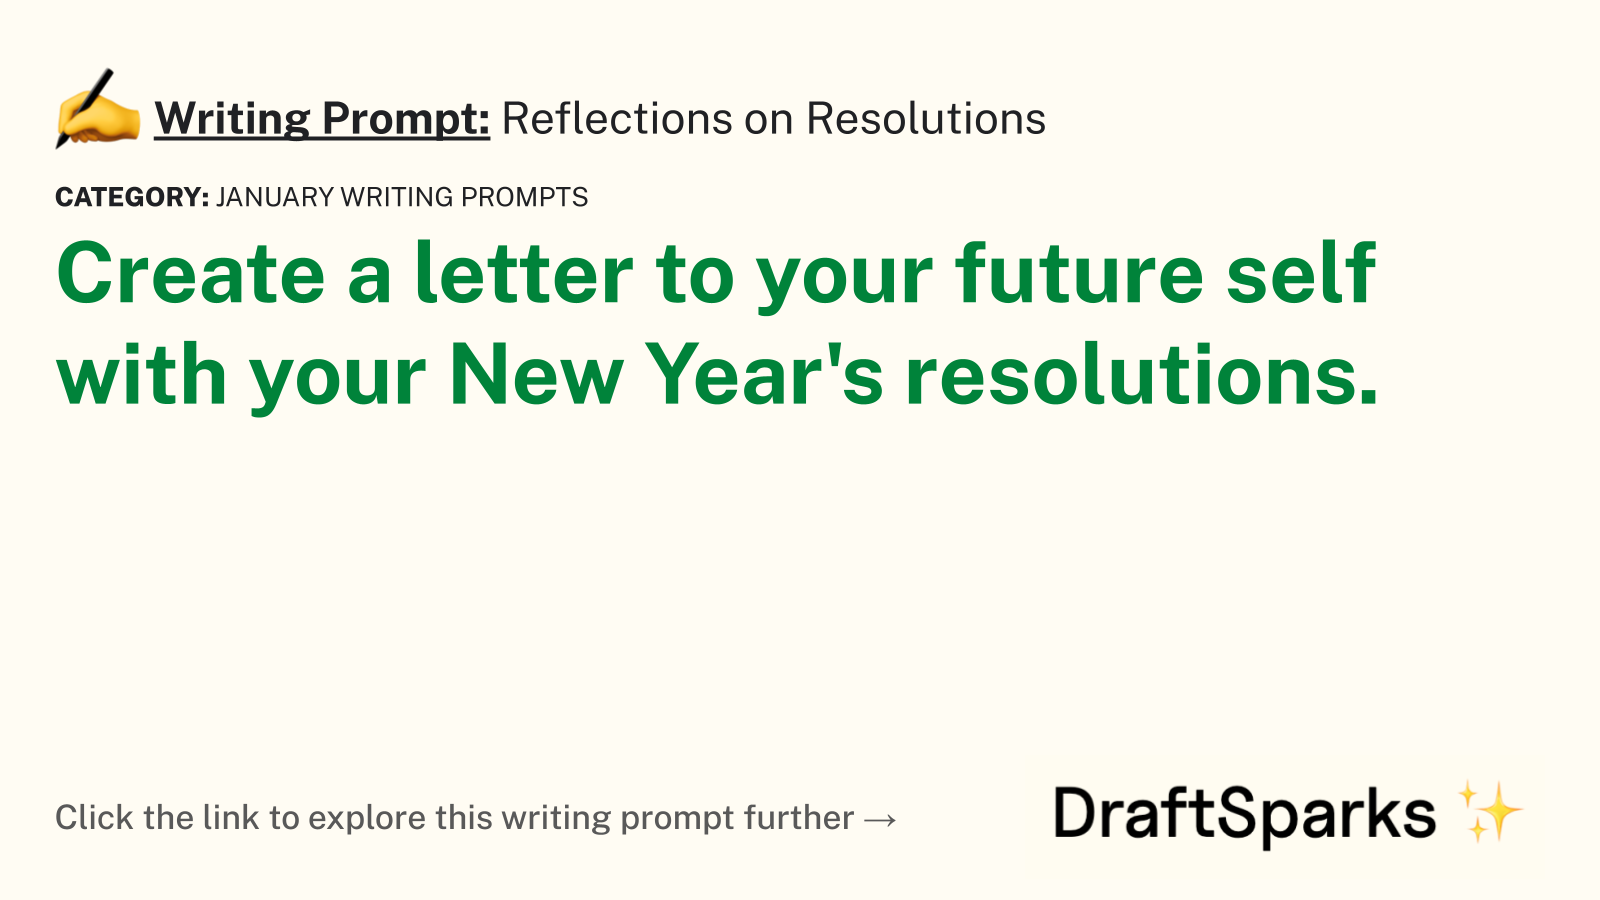 Reflections on Resolutions